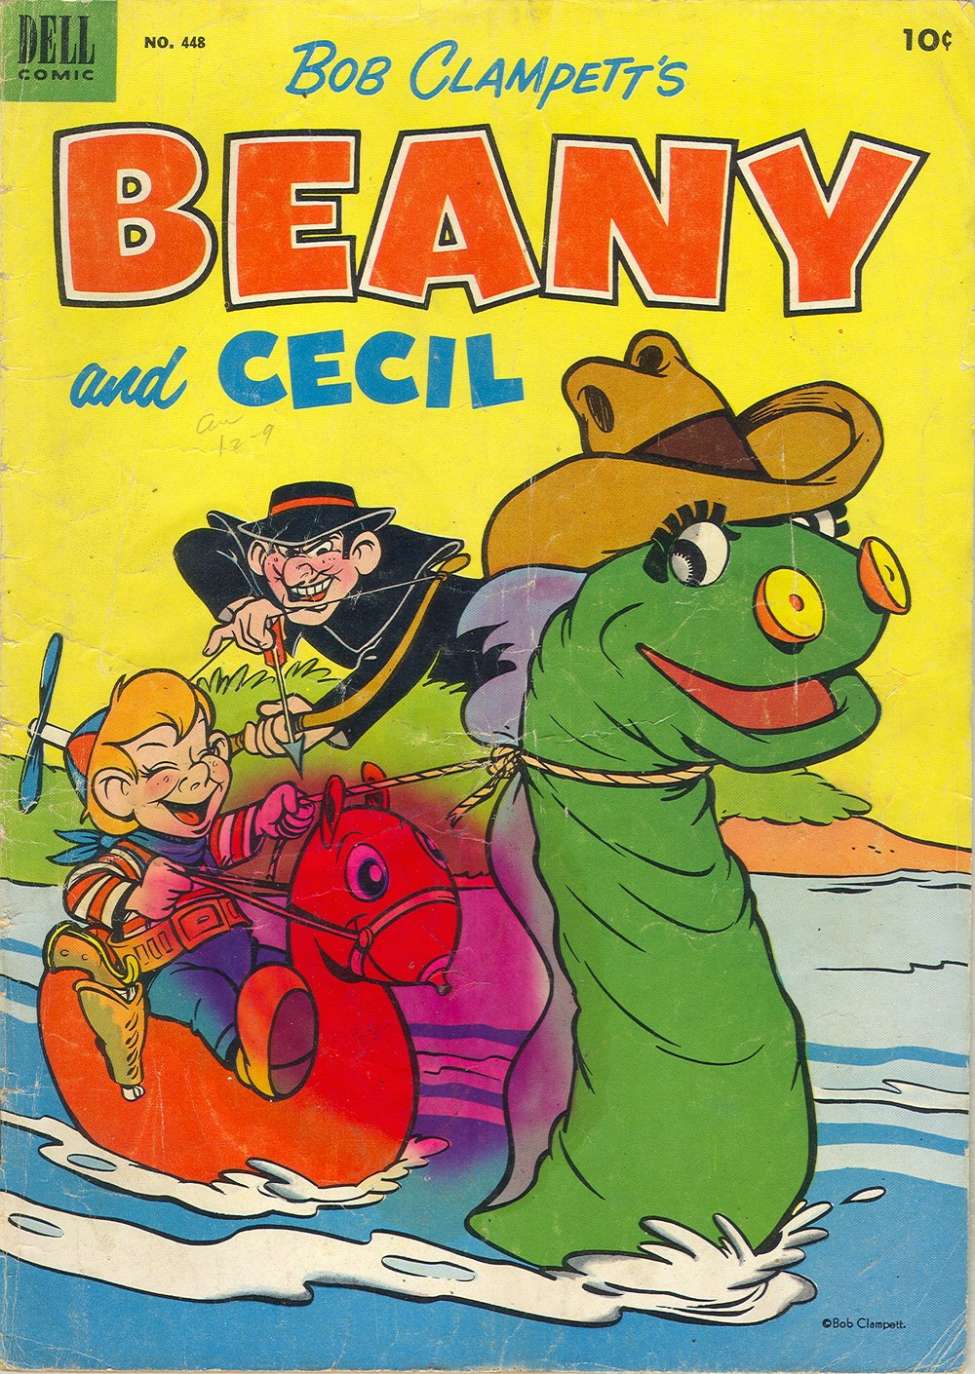 Book Cover For 0448 - Beany and Cecil